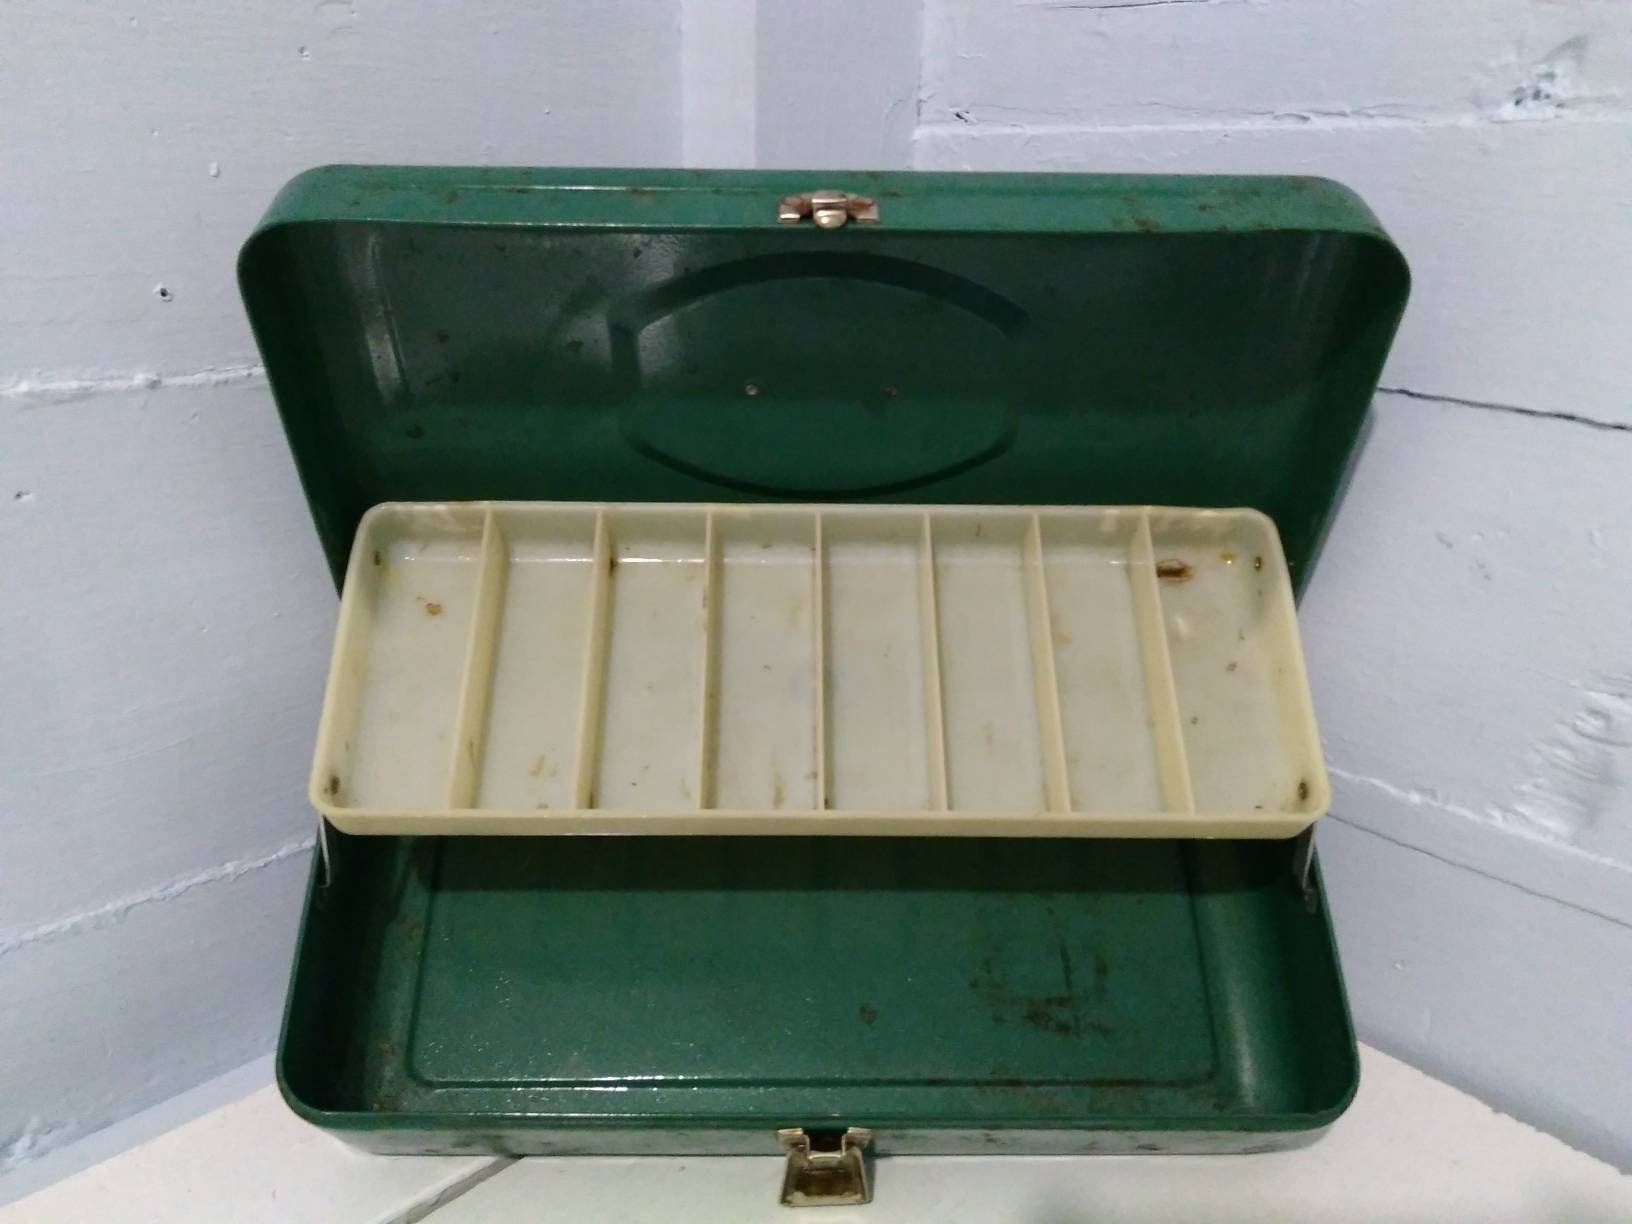 Vintage 60s Green Victor Metal Tackle Box Tool Box Craft Box with Tray  Shabby Chic Metal Box Gift for Him Photo Prop RhymeswithDaughter